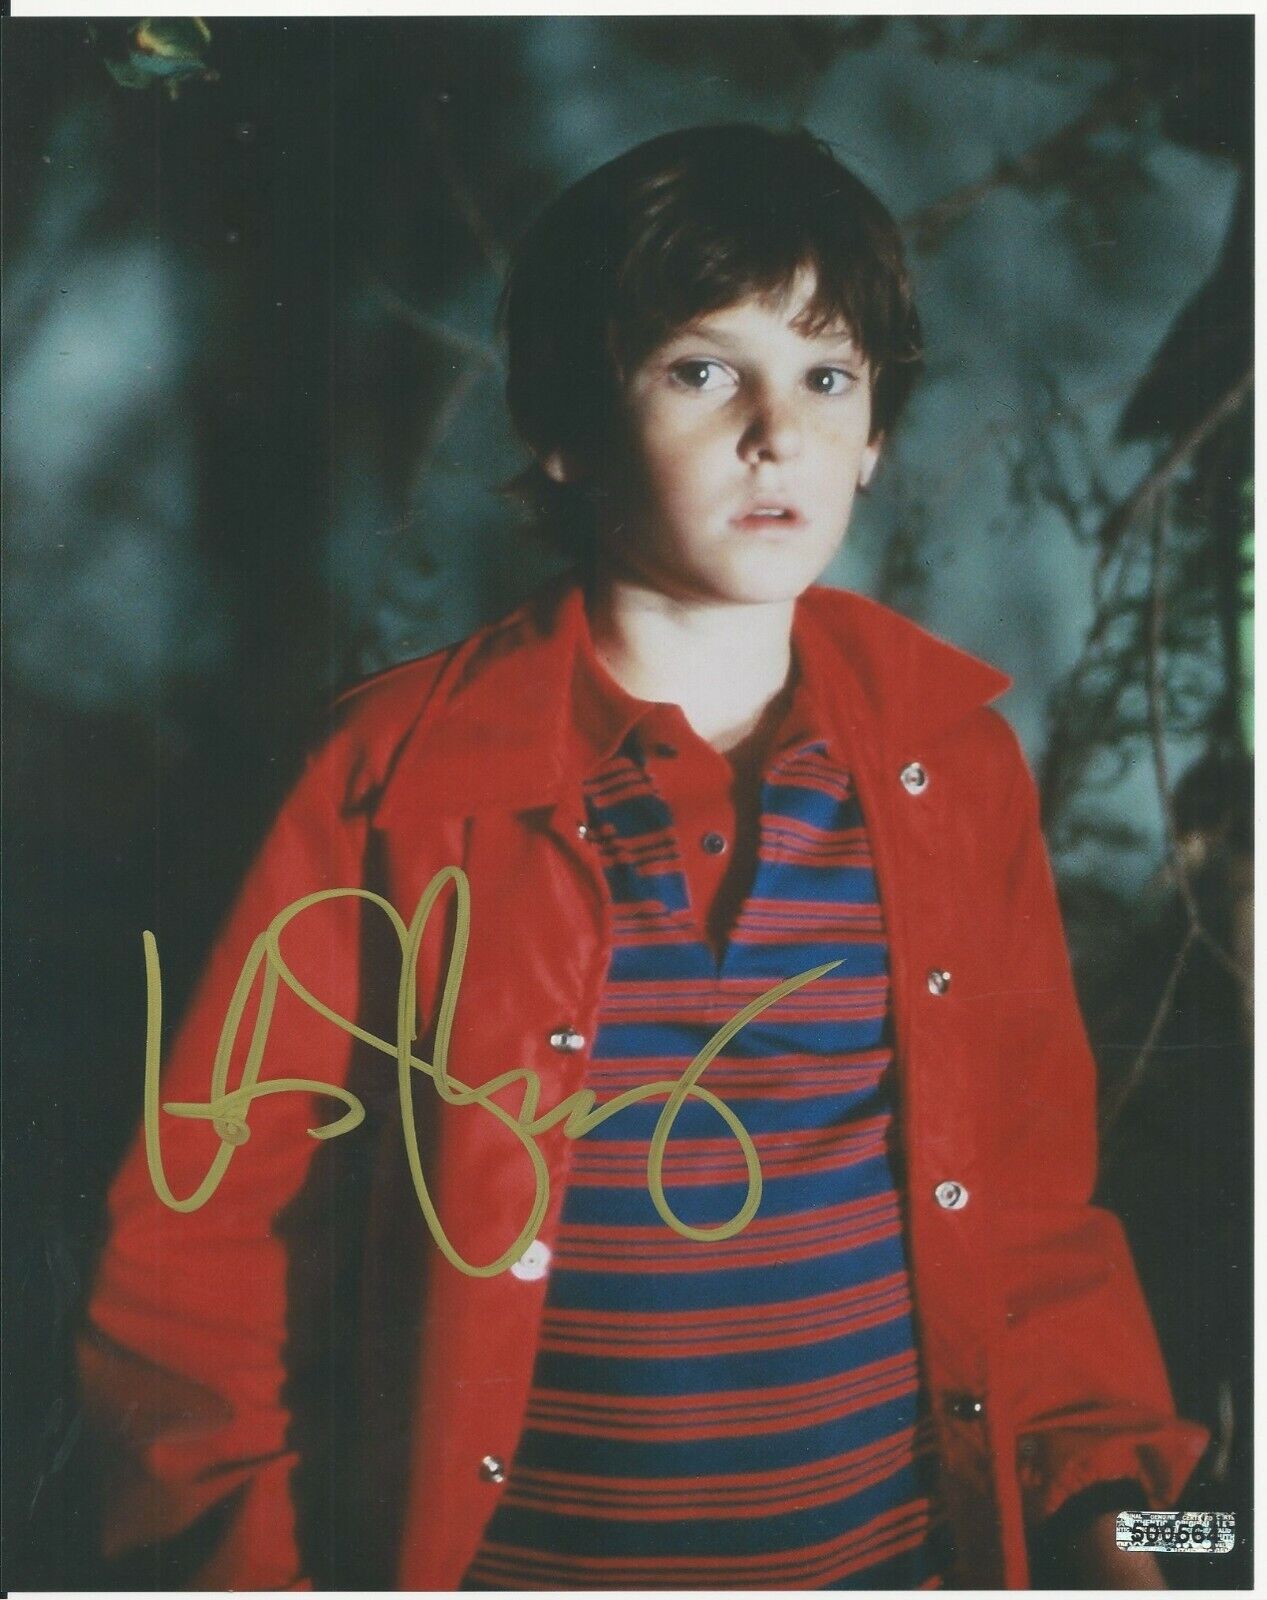 Henry Thomas - E.T. signed Photo Poster painting